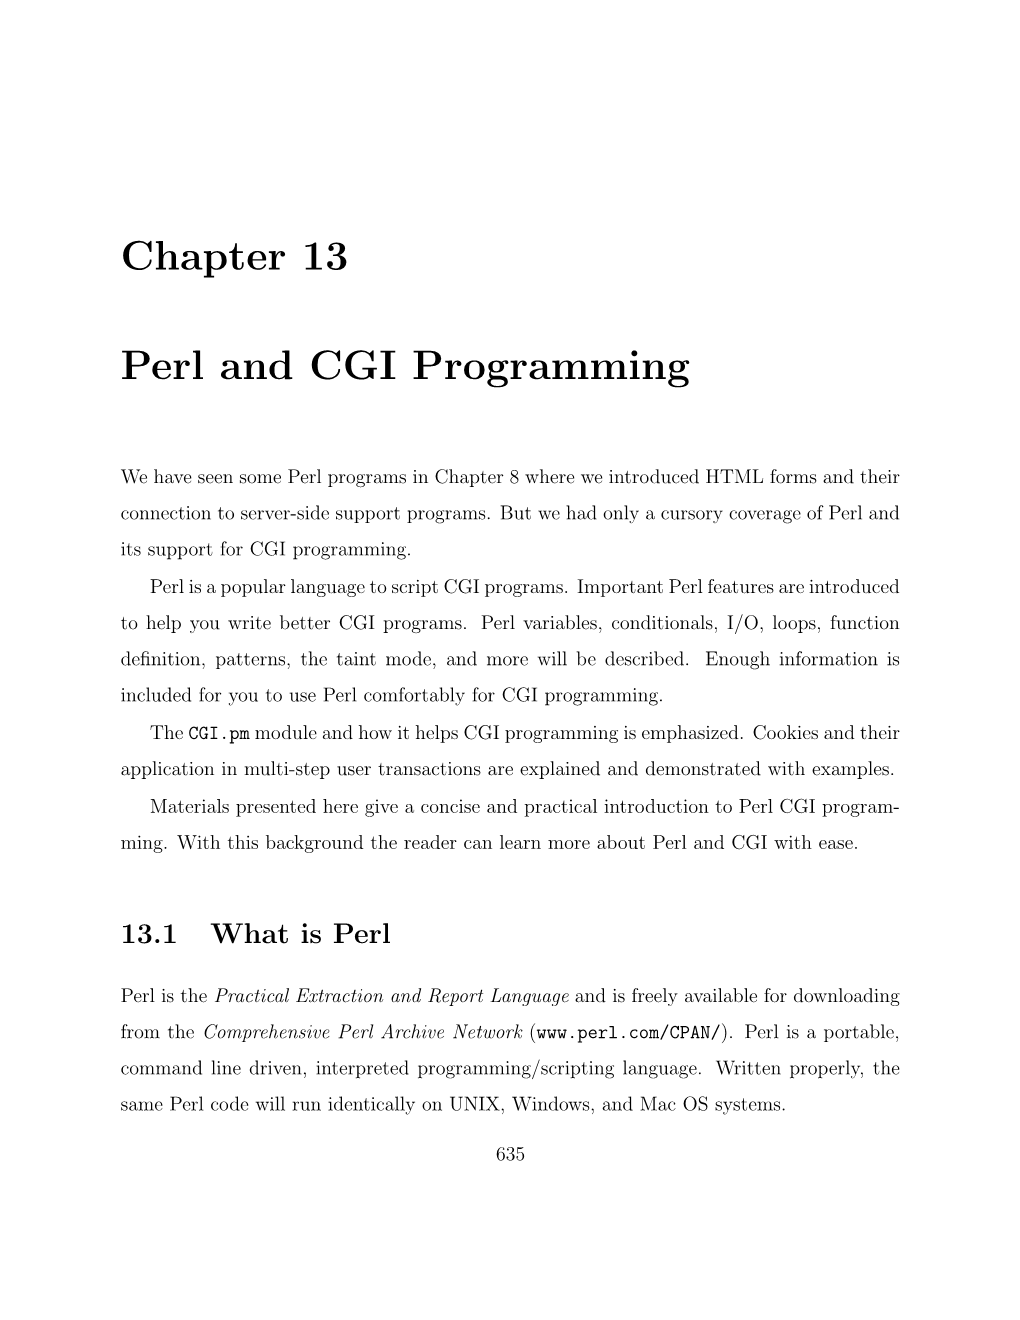 Chapter 13 Perl and CGI Programming